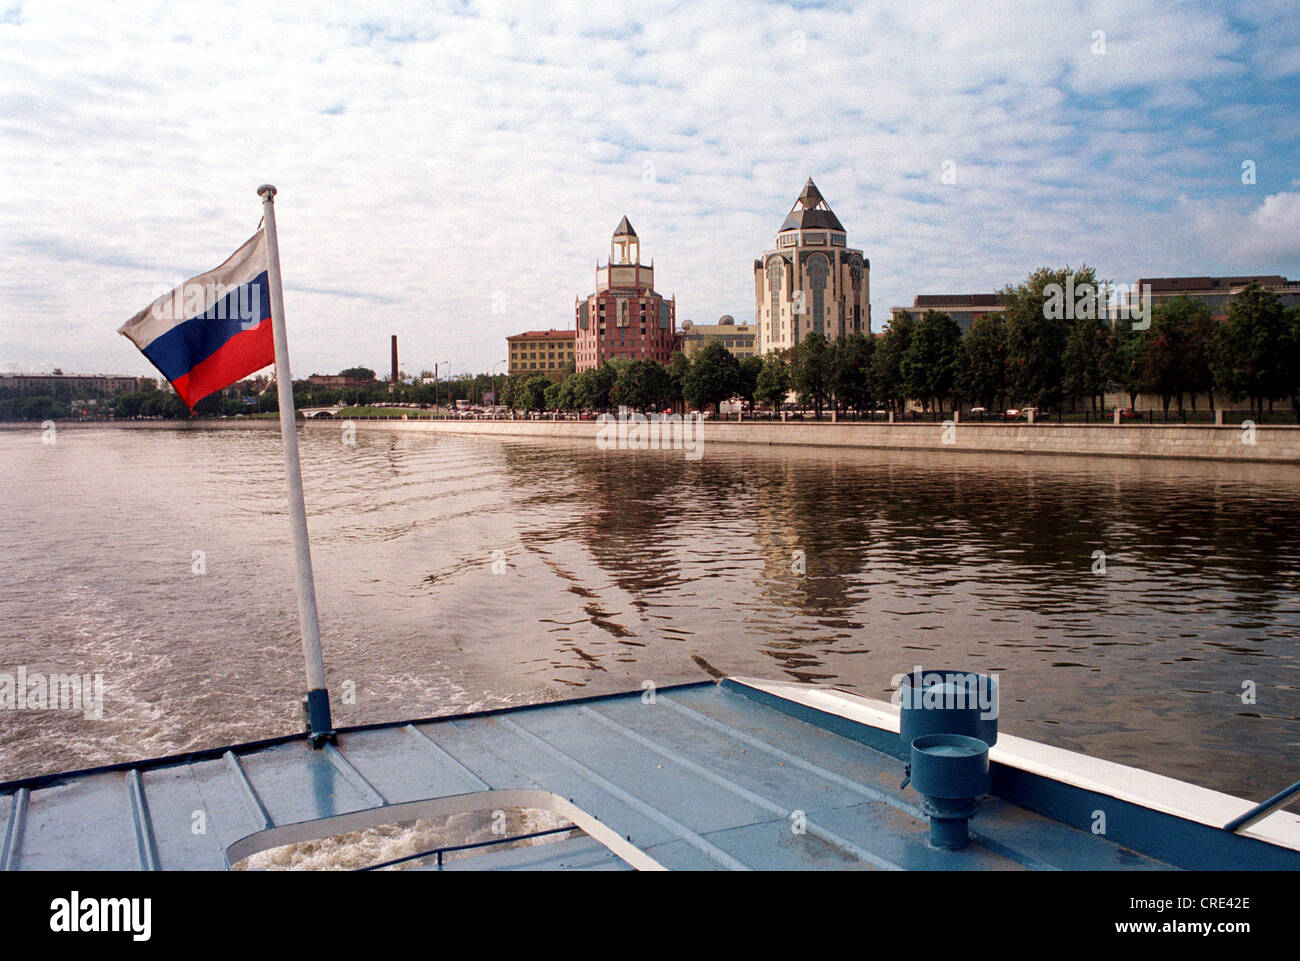 Moscow, Russian flag at the stern of pleasure boats Stock Photo